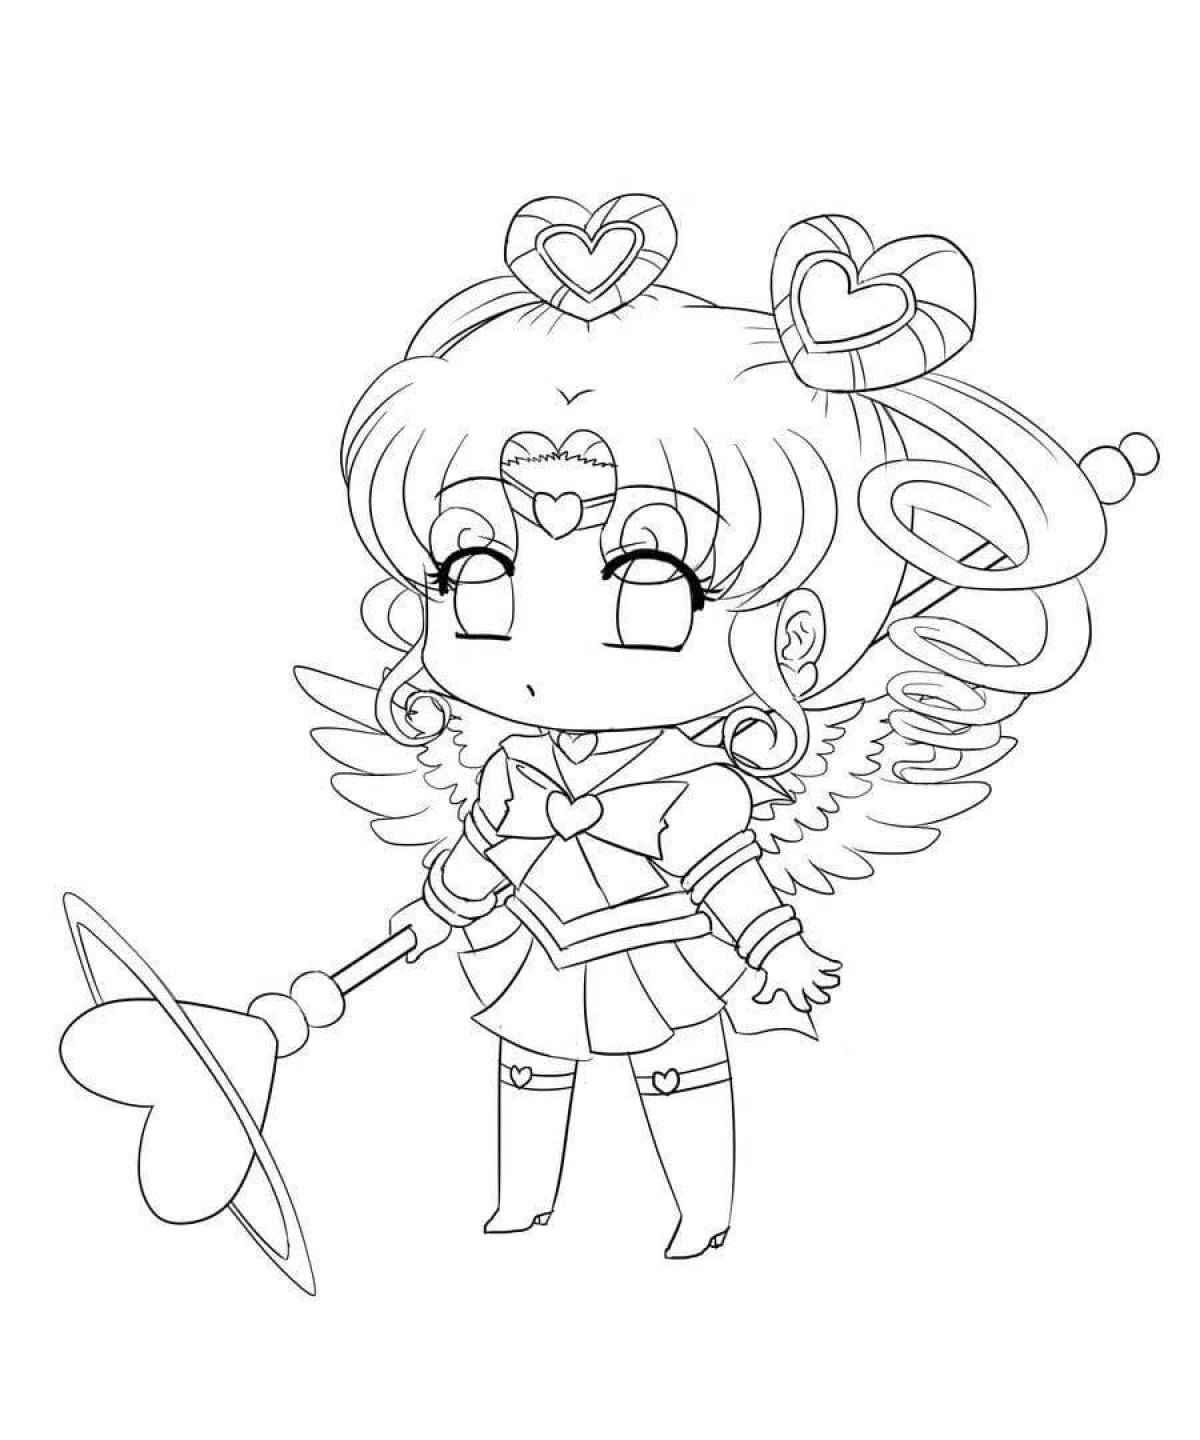 Cute chibi coloring page